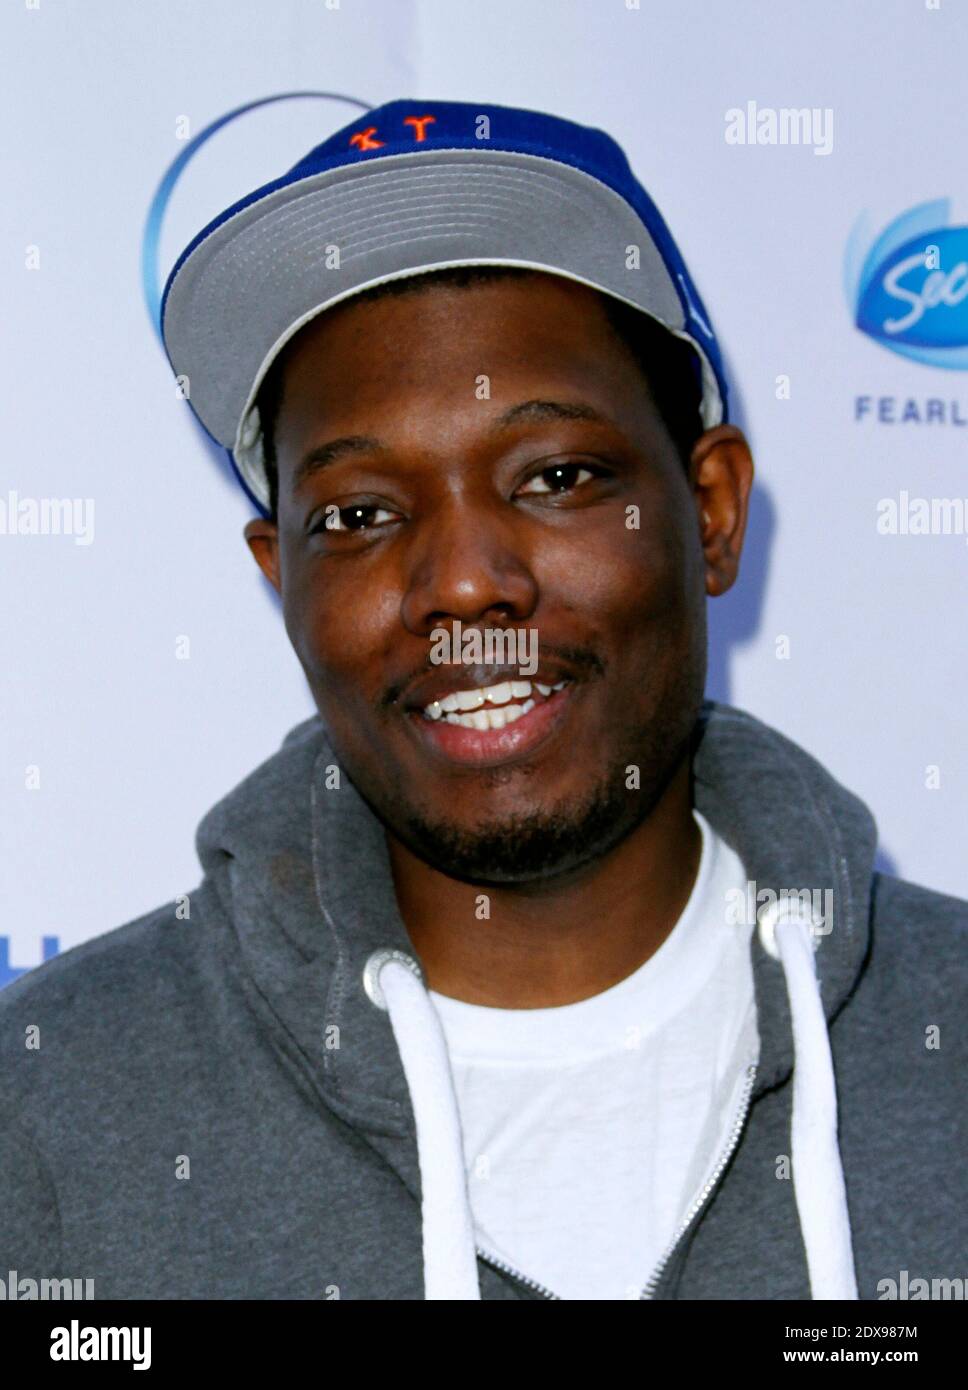 Michael Che attends the Procter & Gamble NYTough Comedy Showcase at Caroline's on Broadway in New York City, NY, USA, on September 23, 2014. Photo by Donna Ward/ABACAPRESS.COM Stock Photo